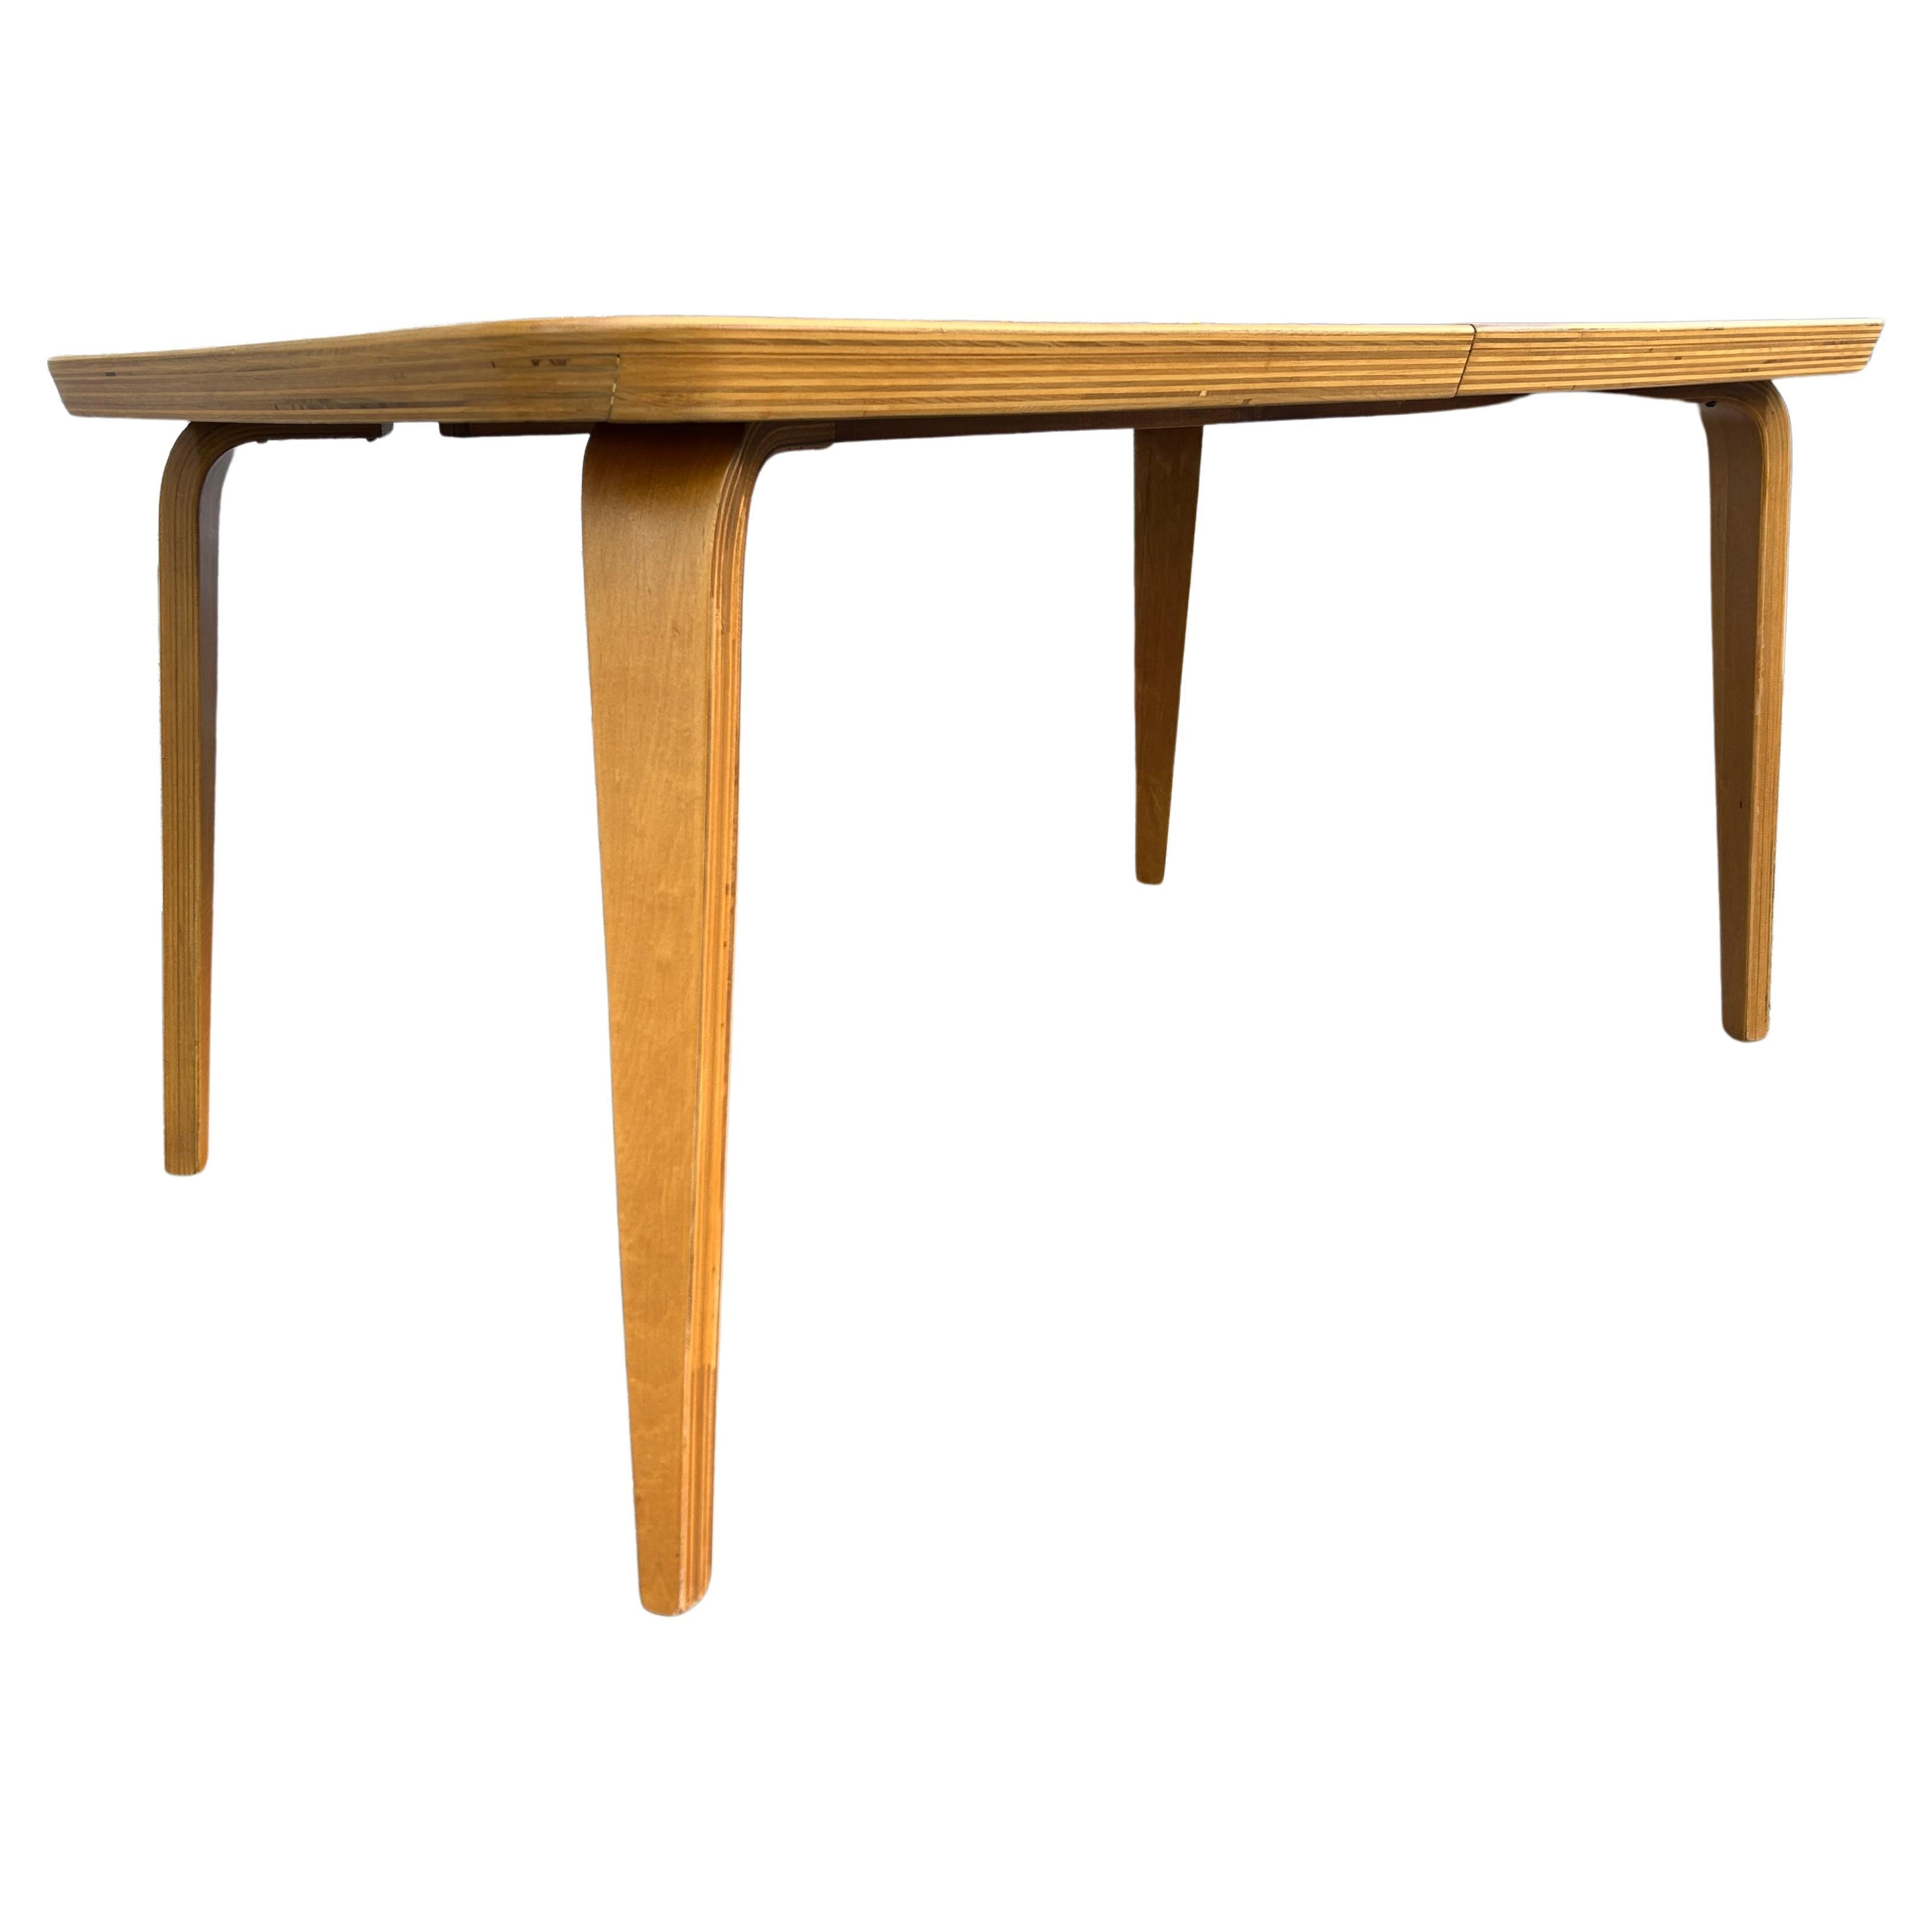 Woodwork Mid-Century Modern Bentwood Rounded Corner Birch Blonde Dining Table with Leaf